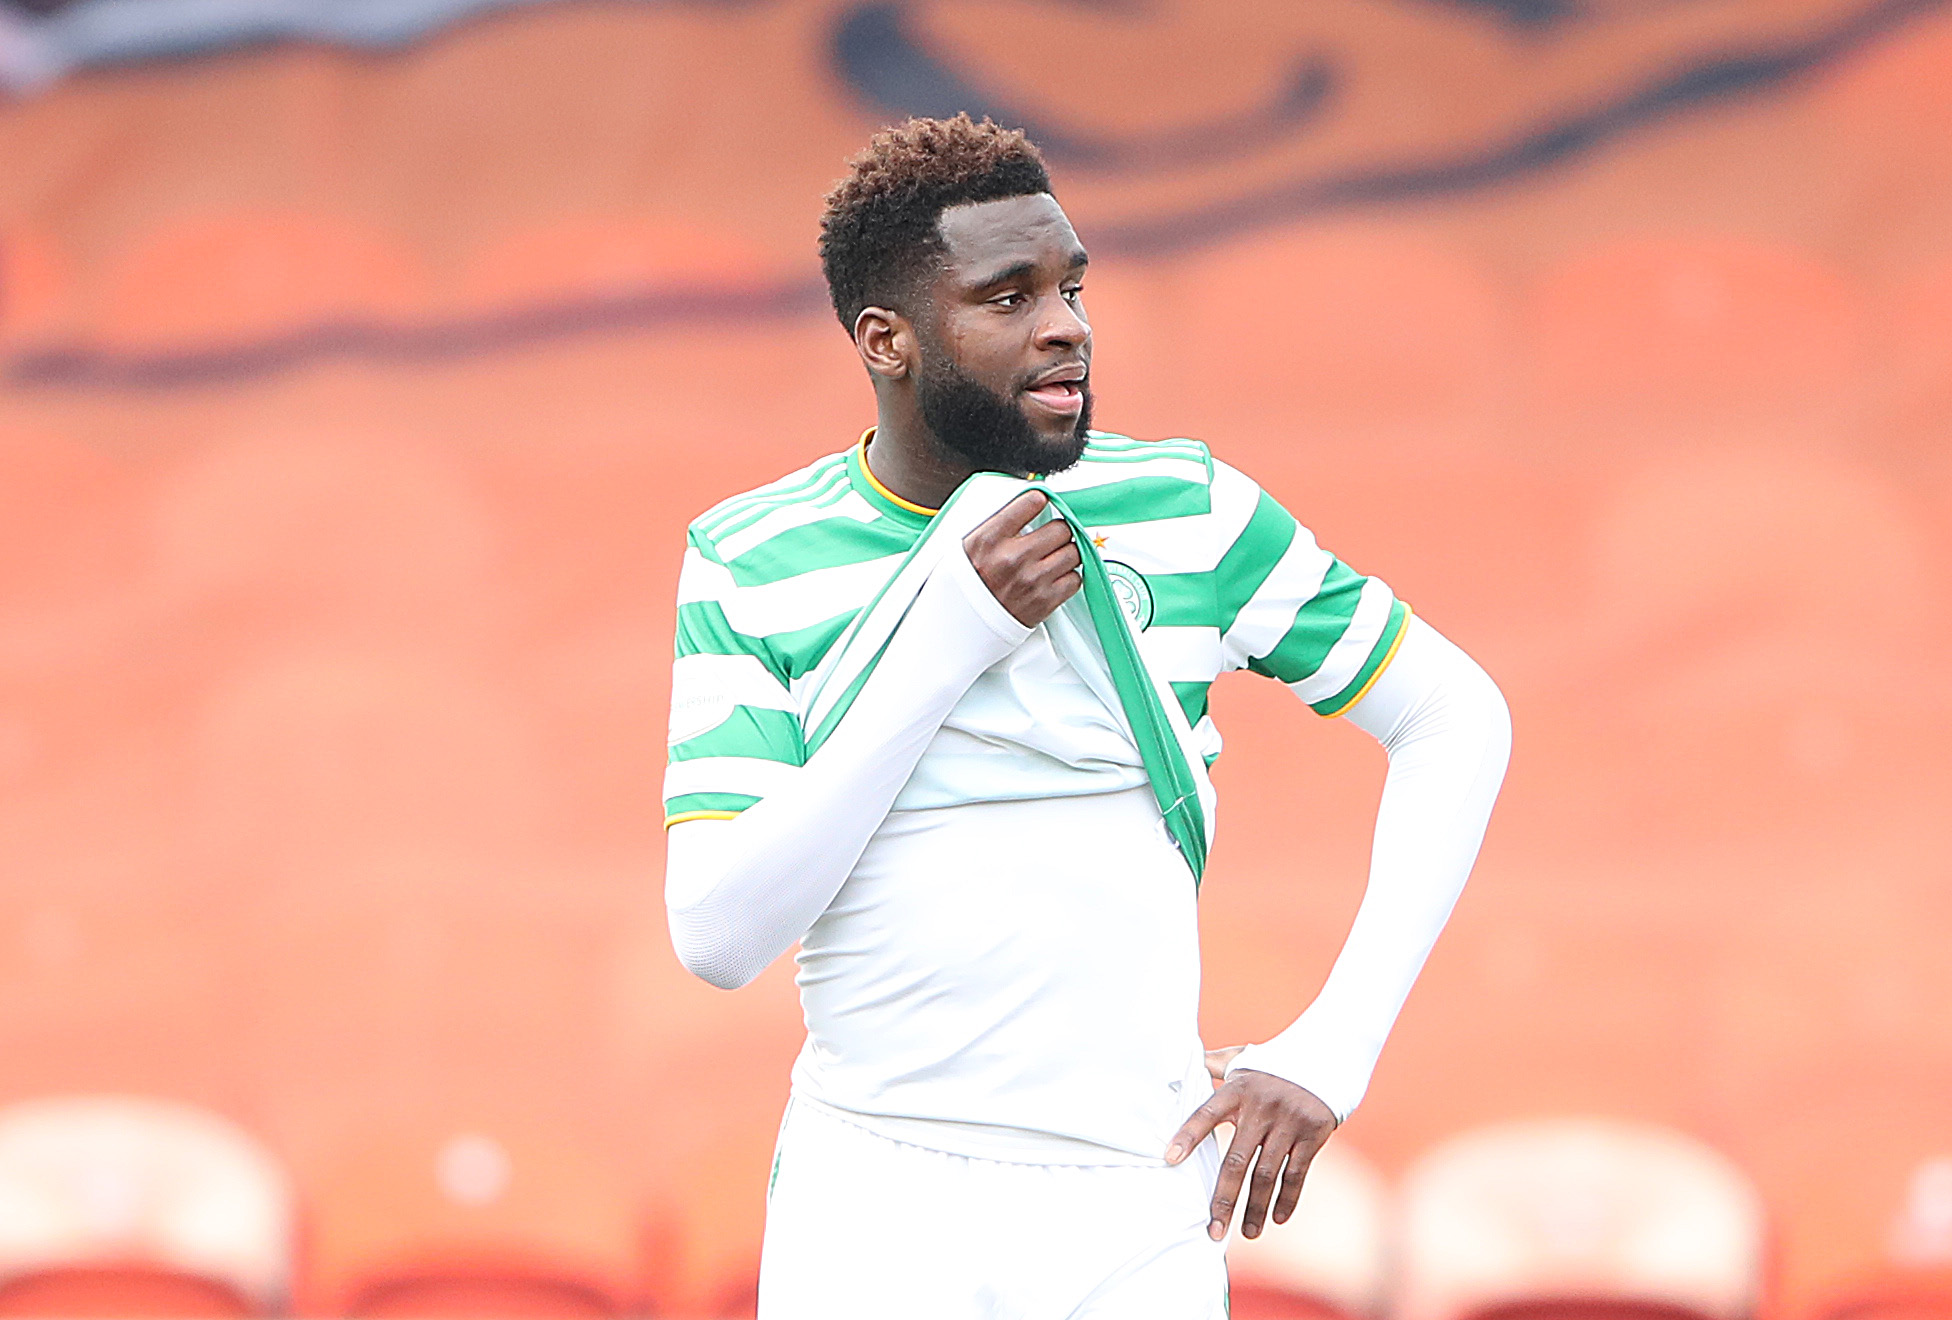 Celtic offer meek capitulation to inconsistent SFA, should back players